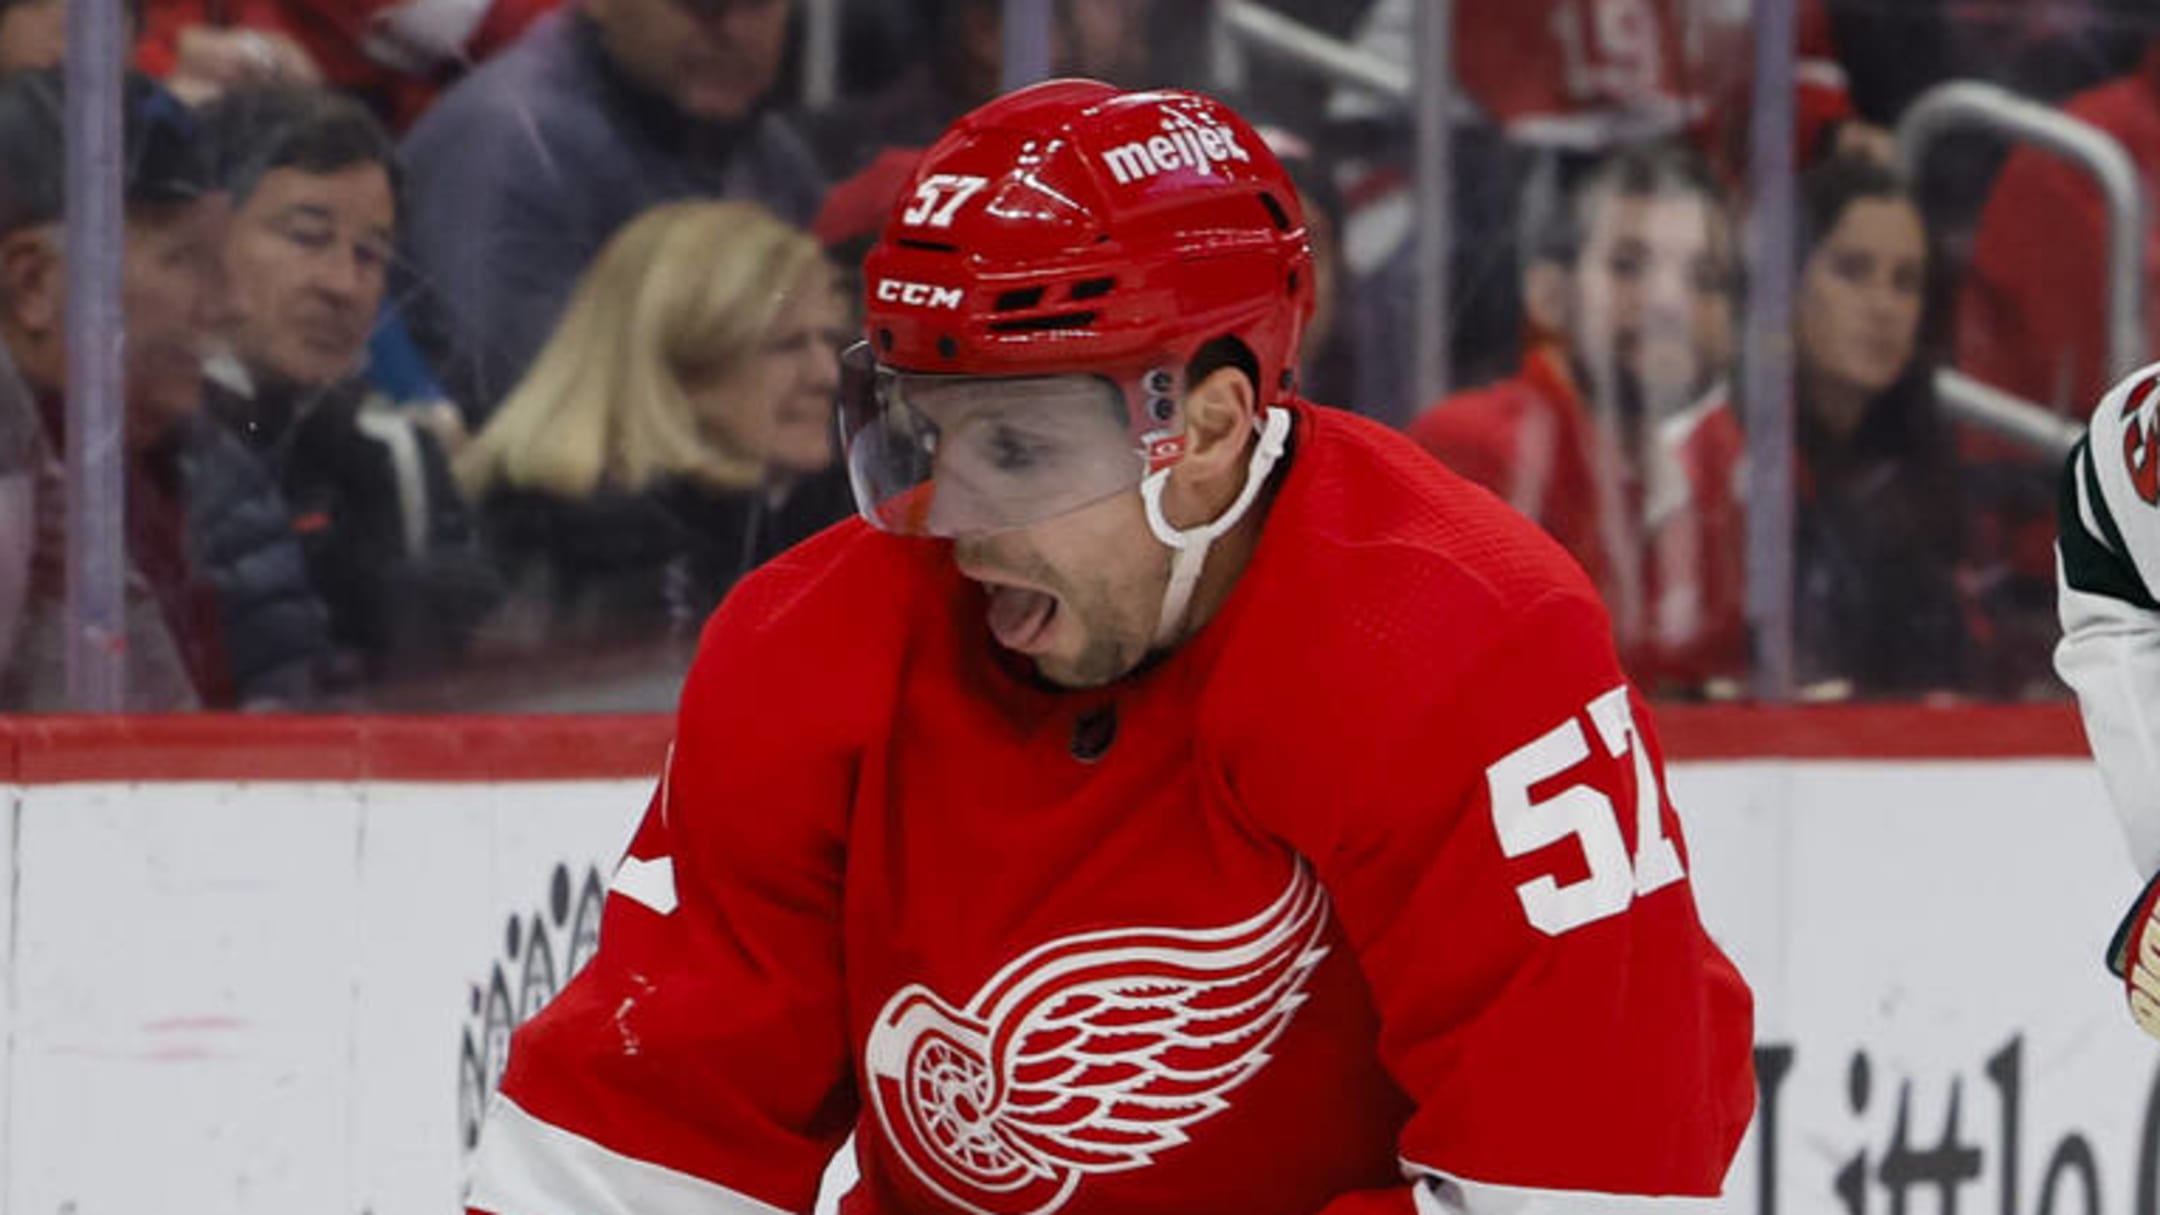 Red Wings' David Perron suspended six games for cross-checking Senators'  Artem Zub - Daily Faceoff